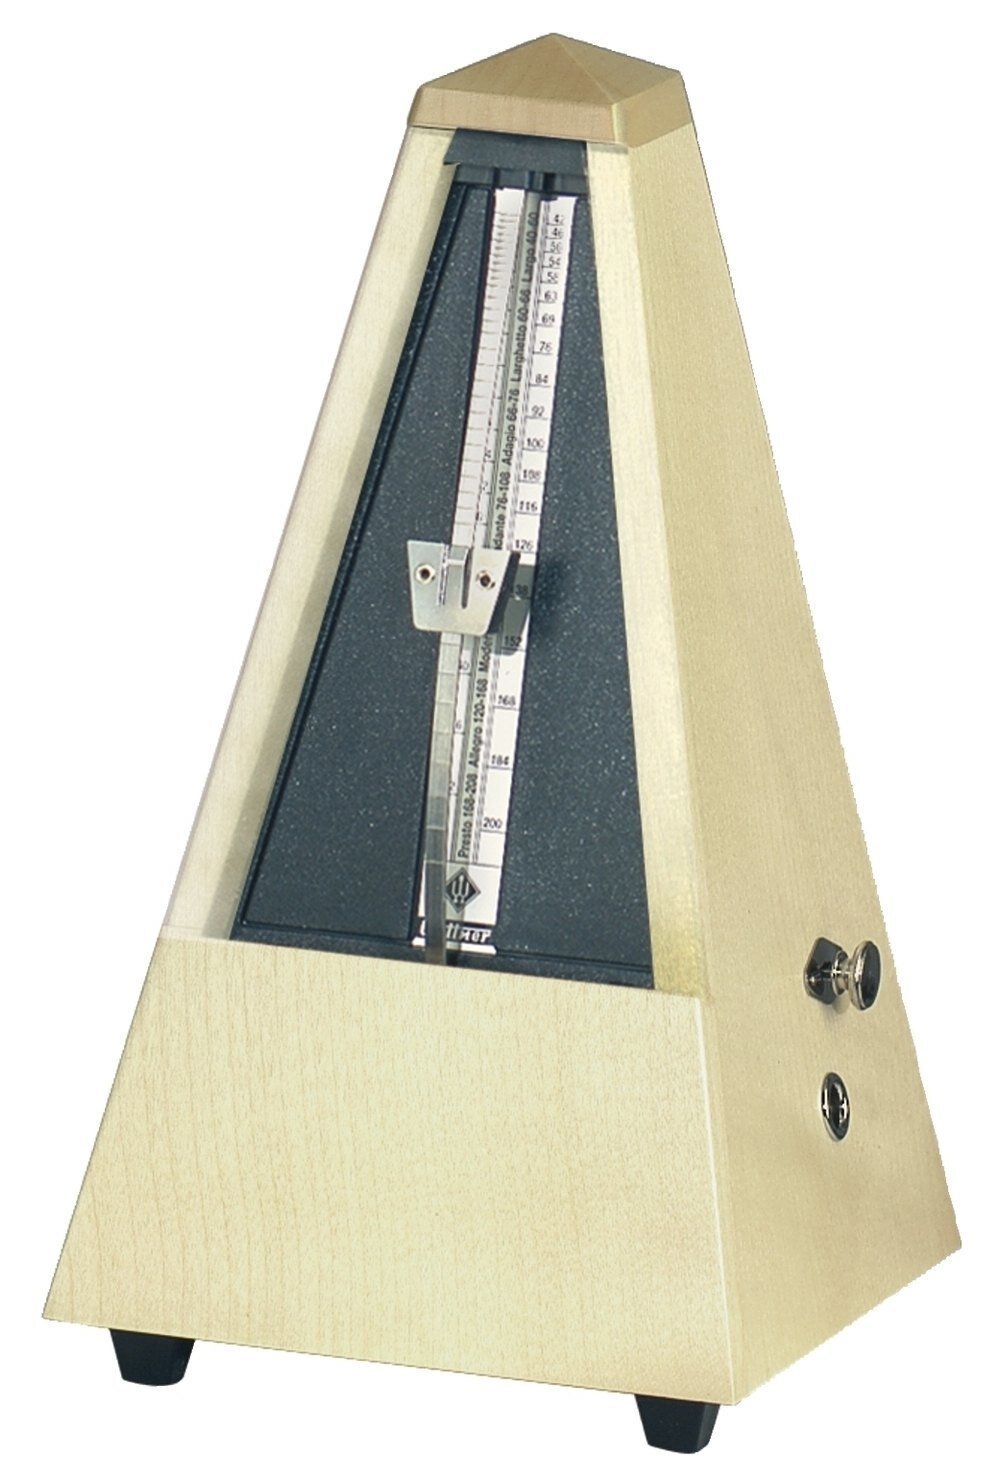 Wittner Mat natural maple wood pyramid + bell : photo 1